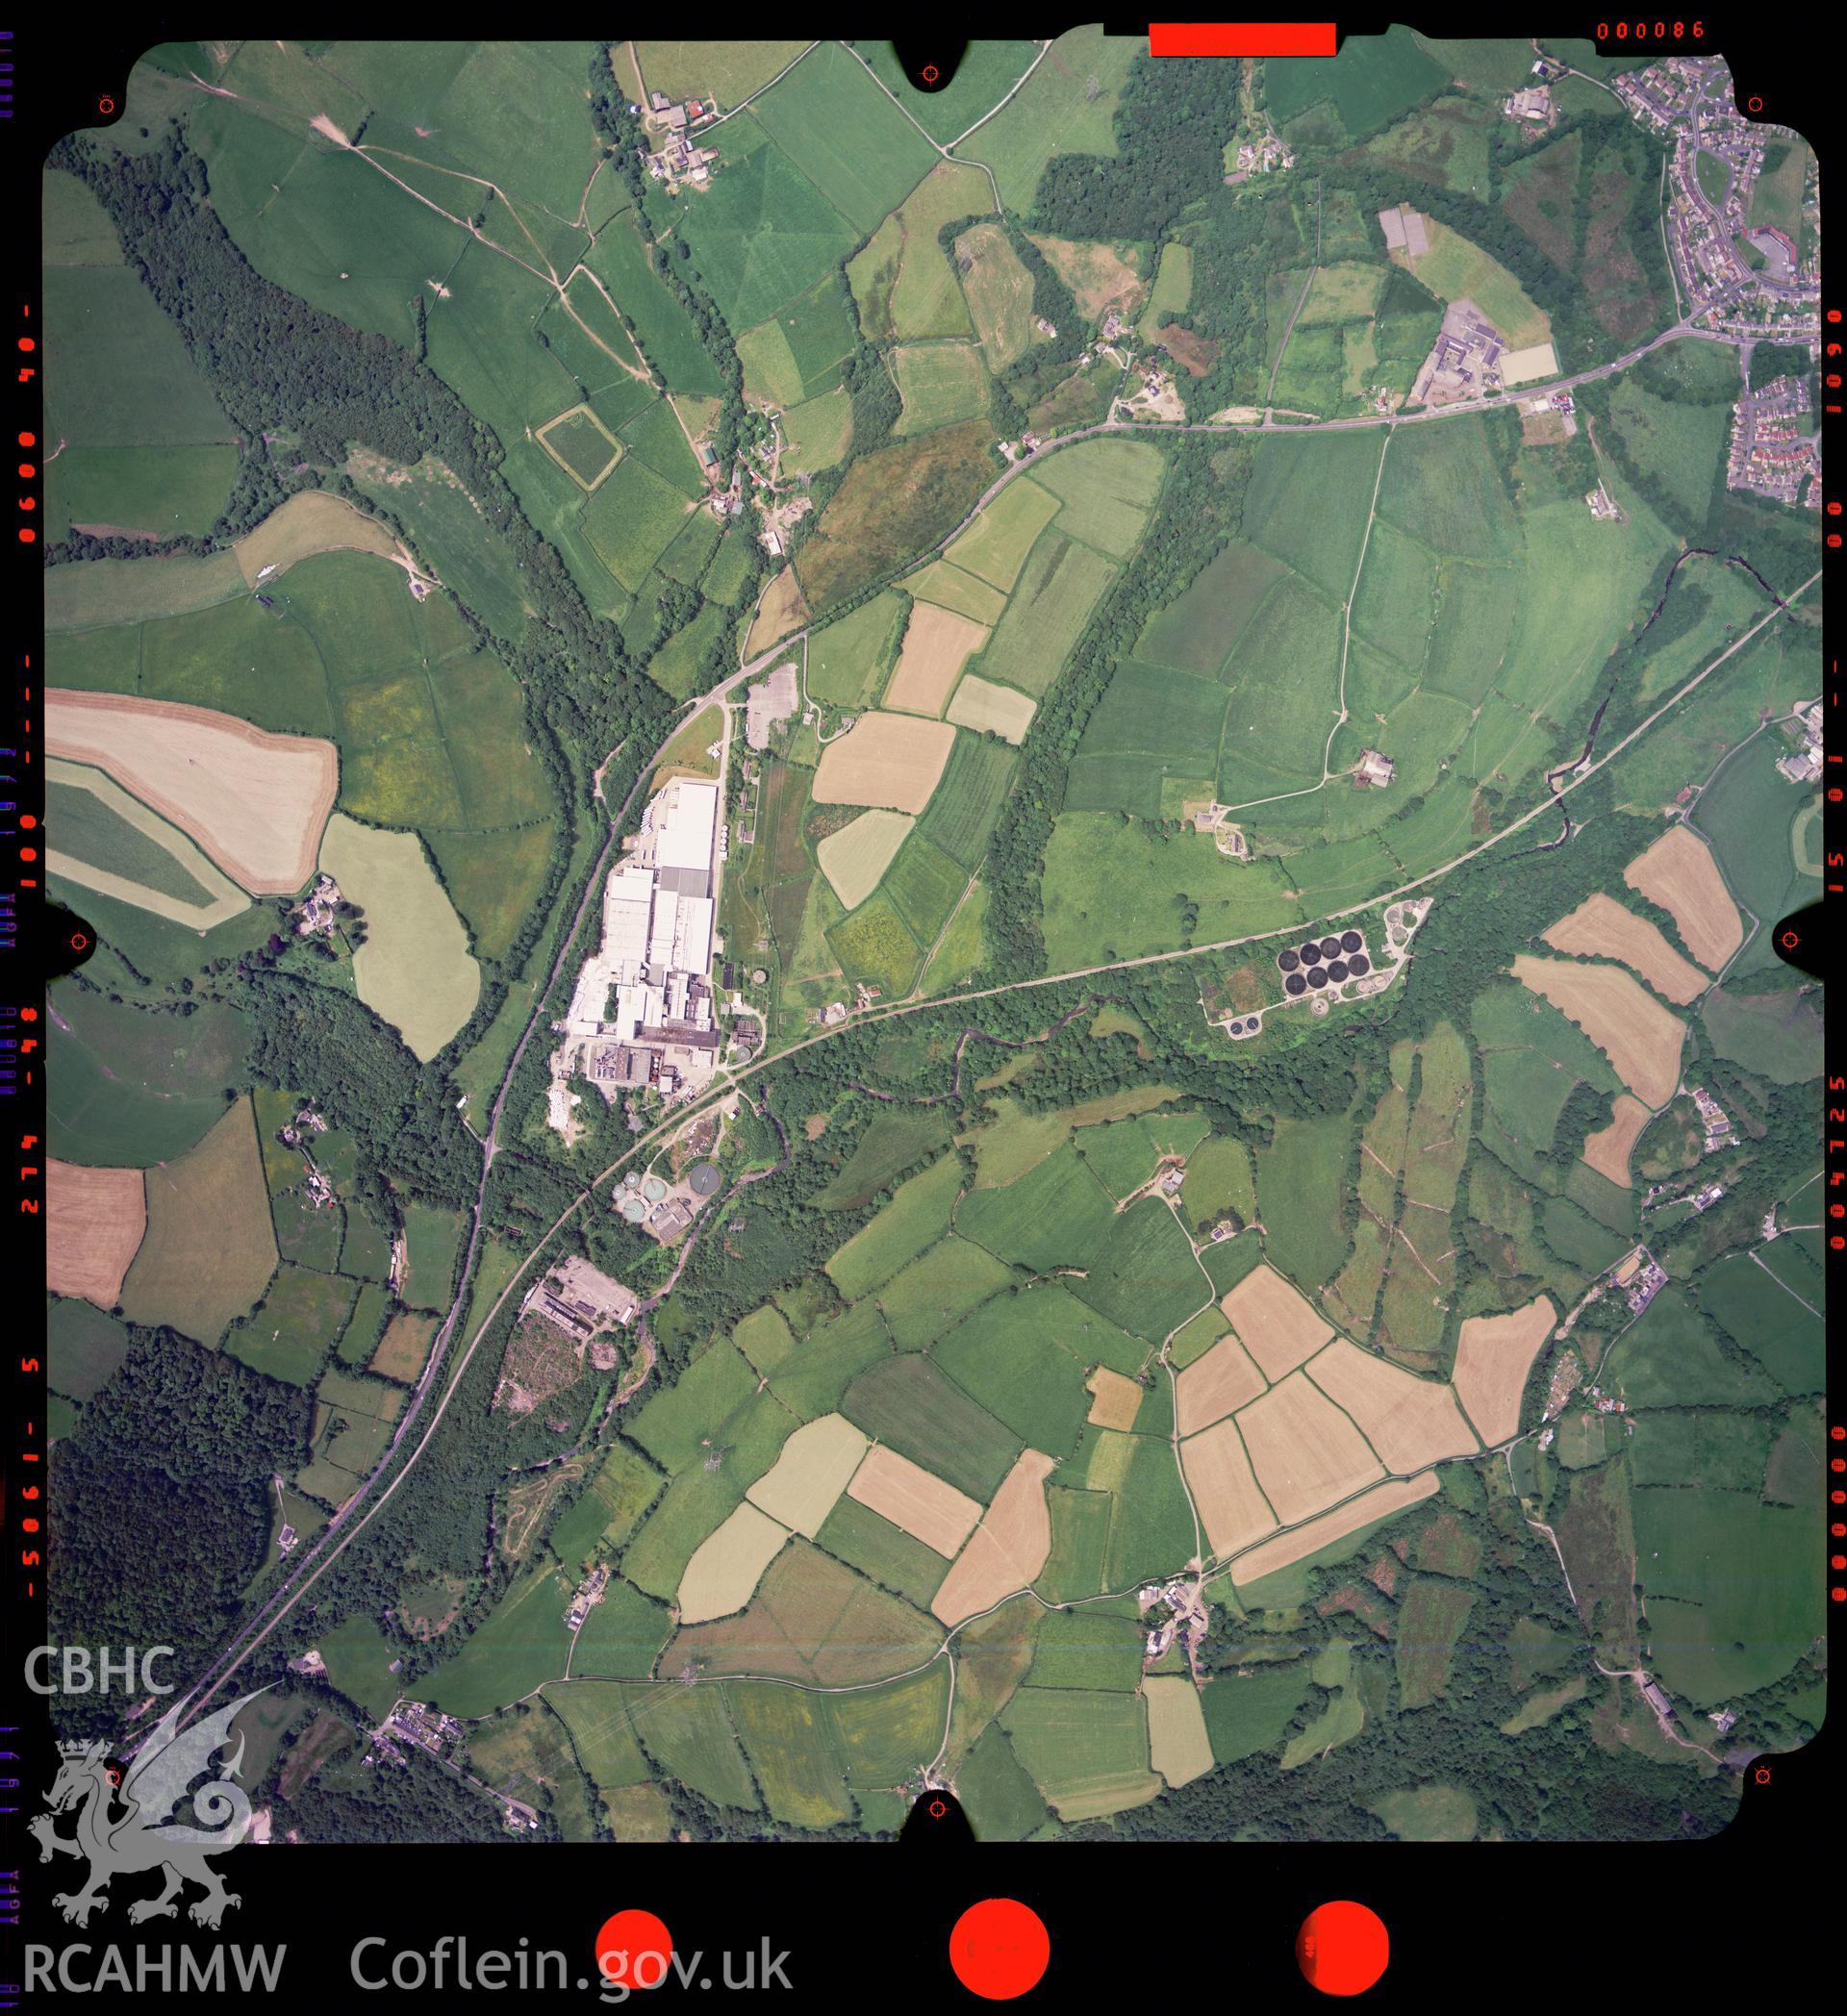 Digitized copy of a colour aerial photograph showing the area around Bridgend, taken by Ordnance Survey, 2003.